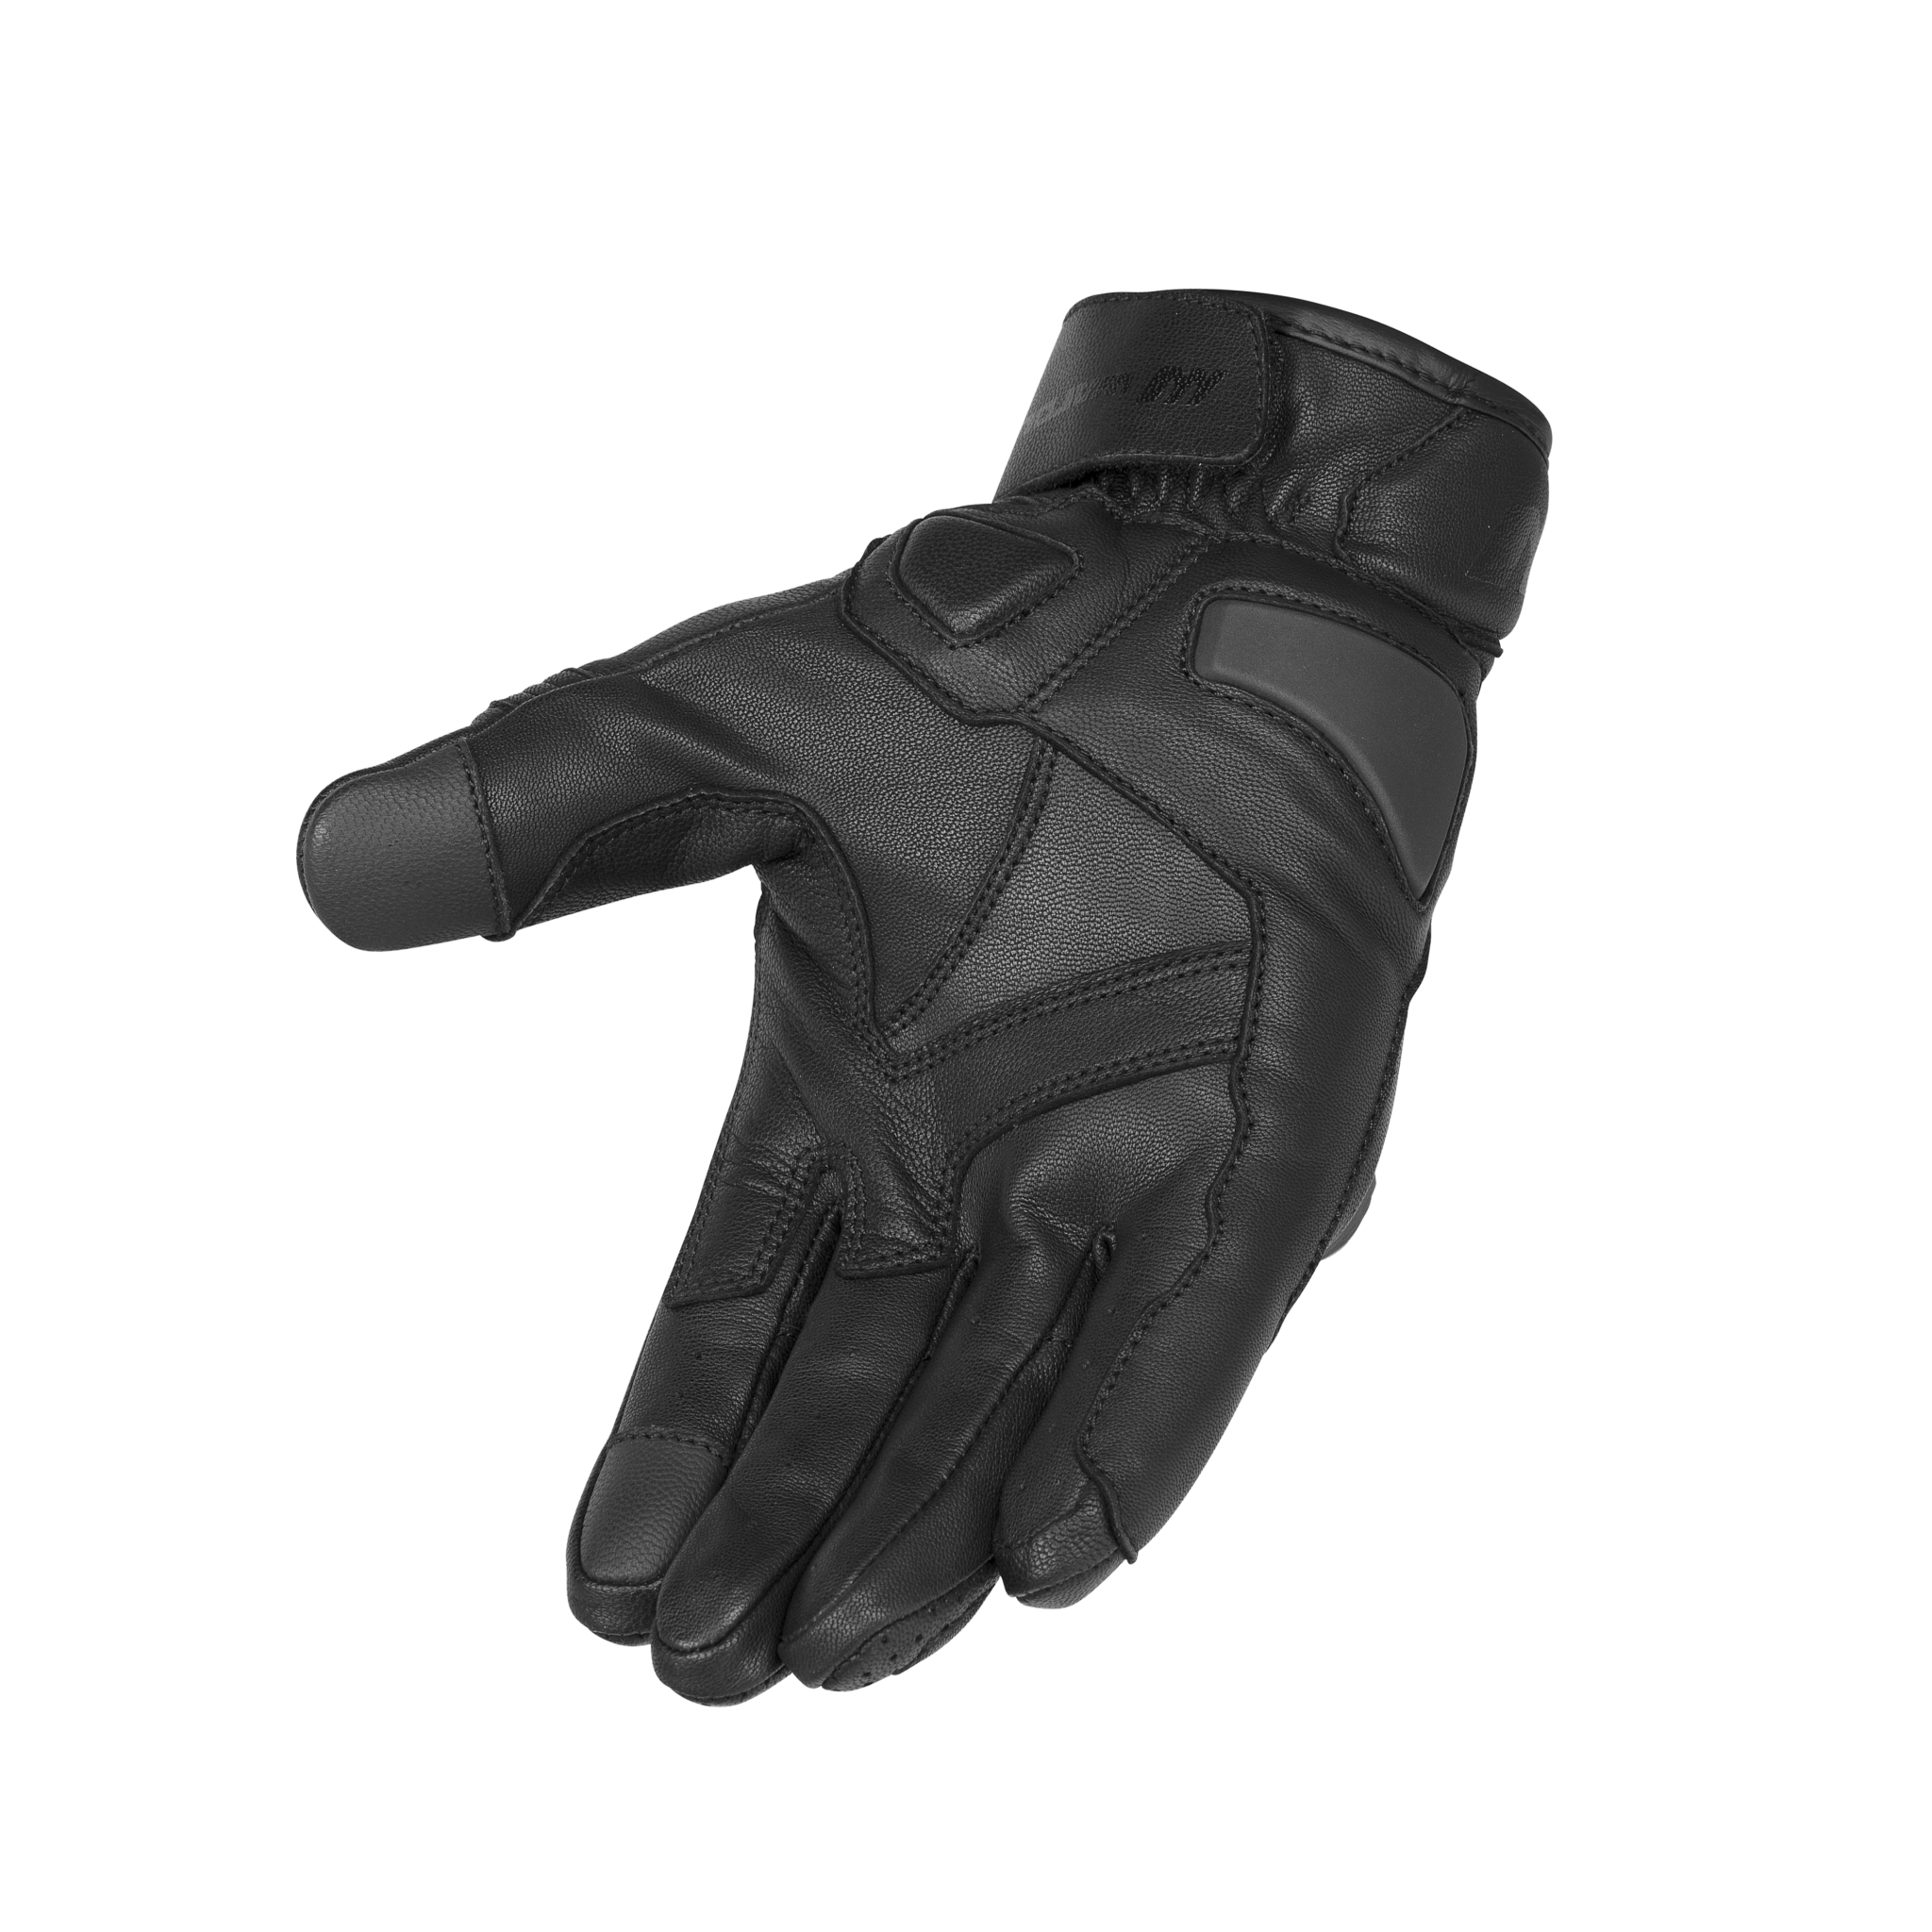 Vortex Motorcycle gloves, TPU protection, breathable, black back